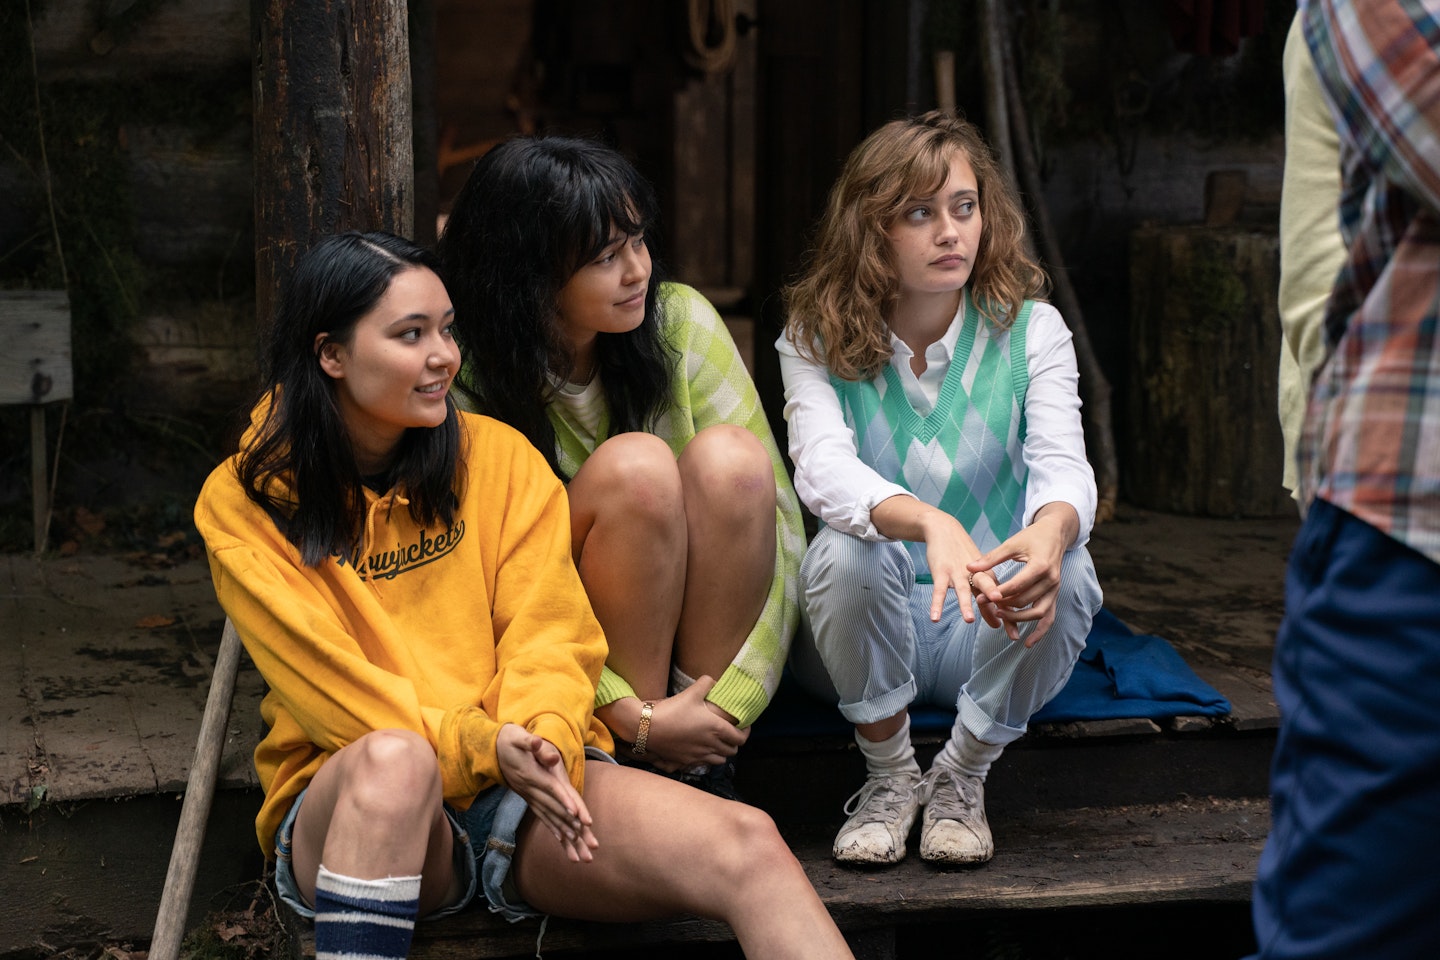 Euphoria season 2: 11 outfits inspired by the 2000s spotted in the show